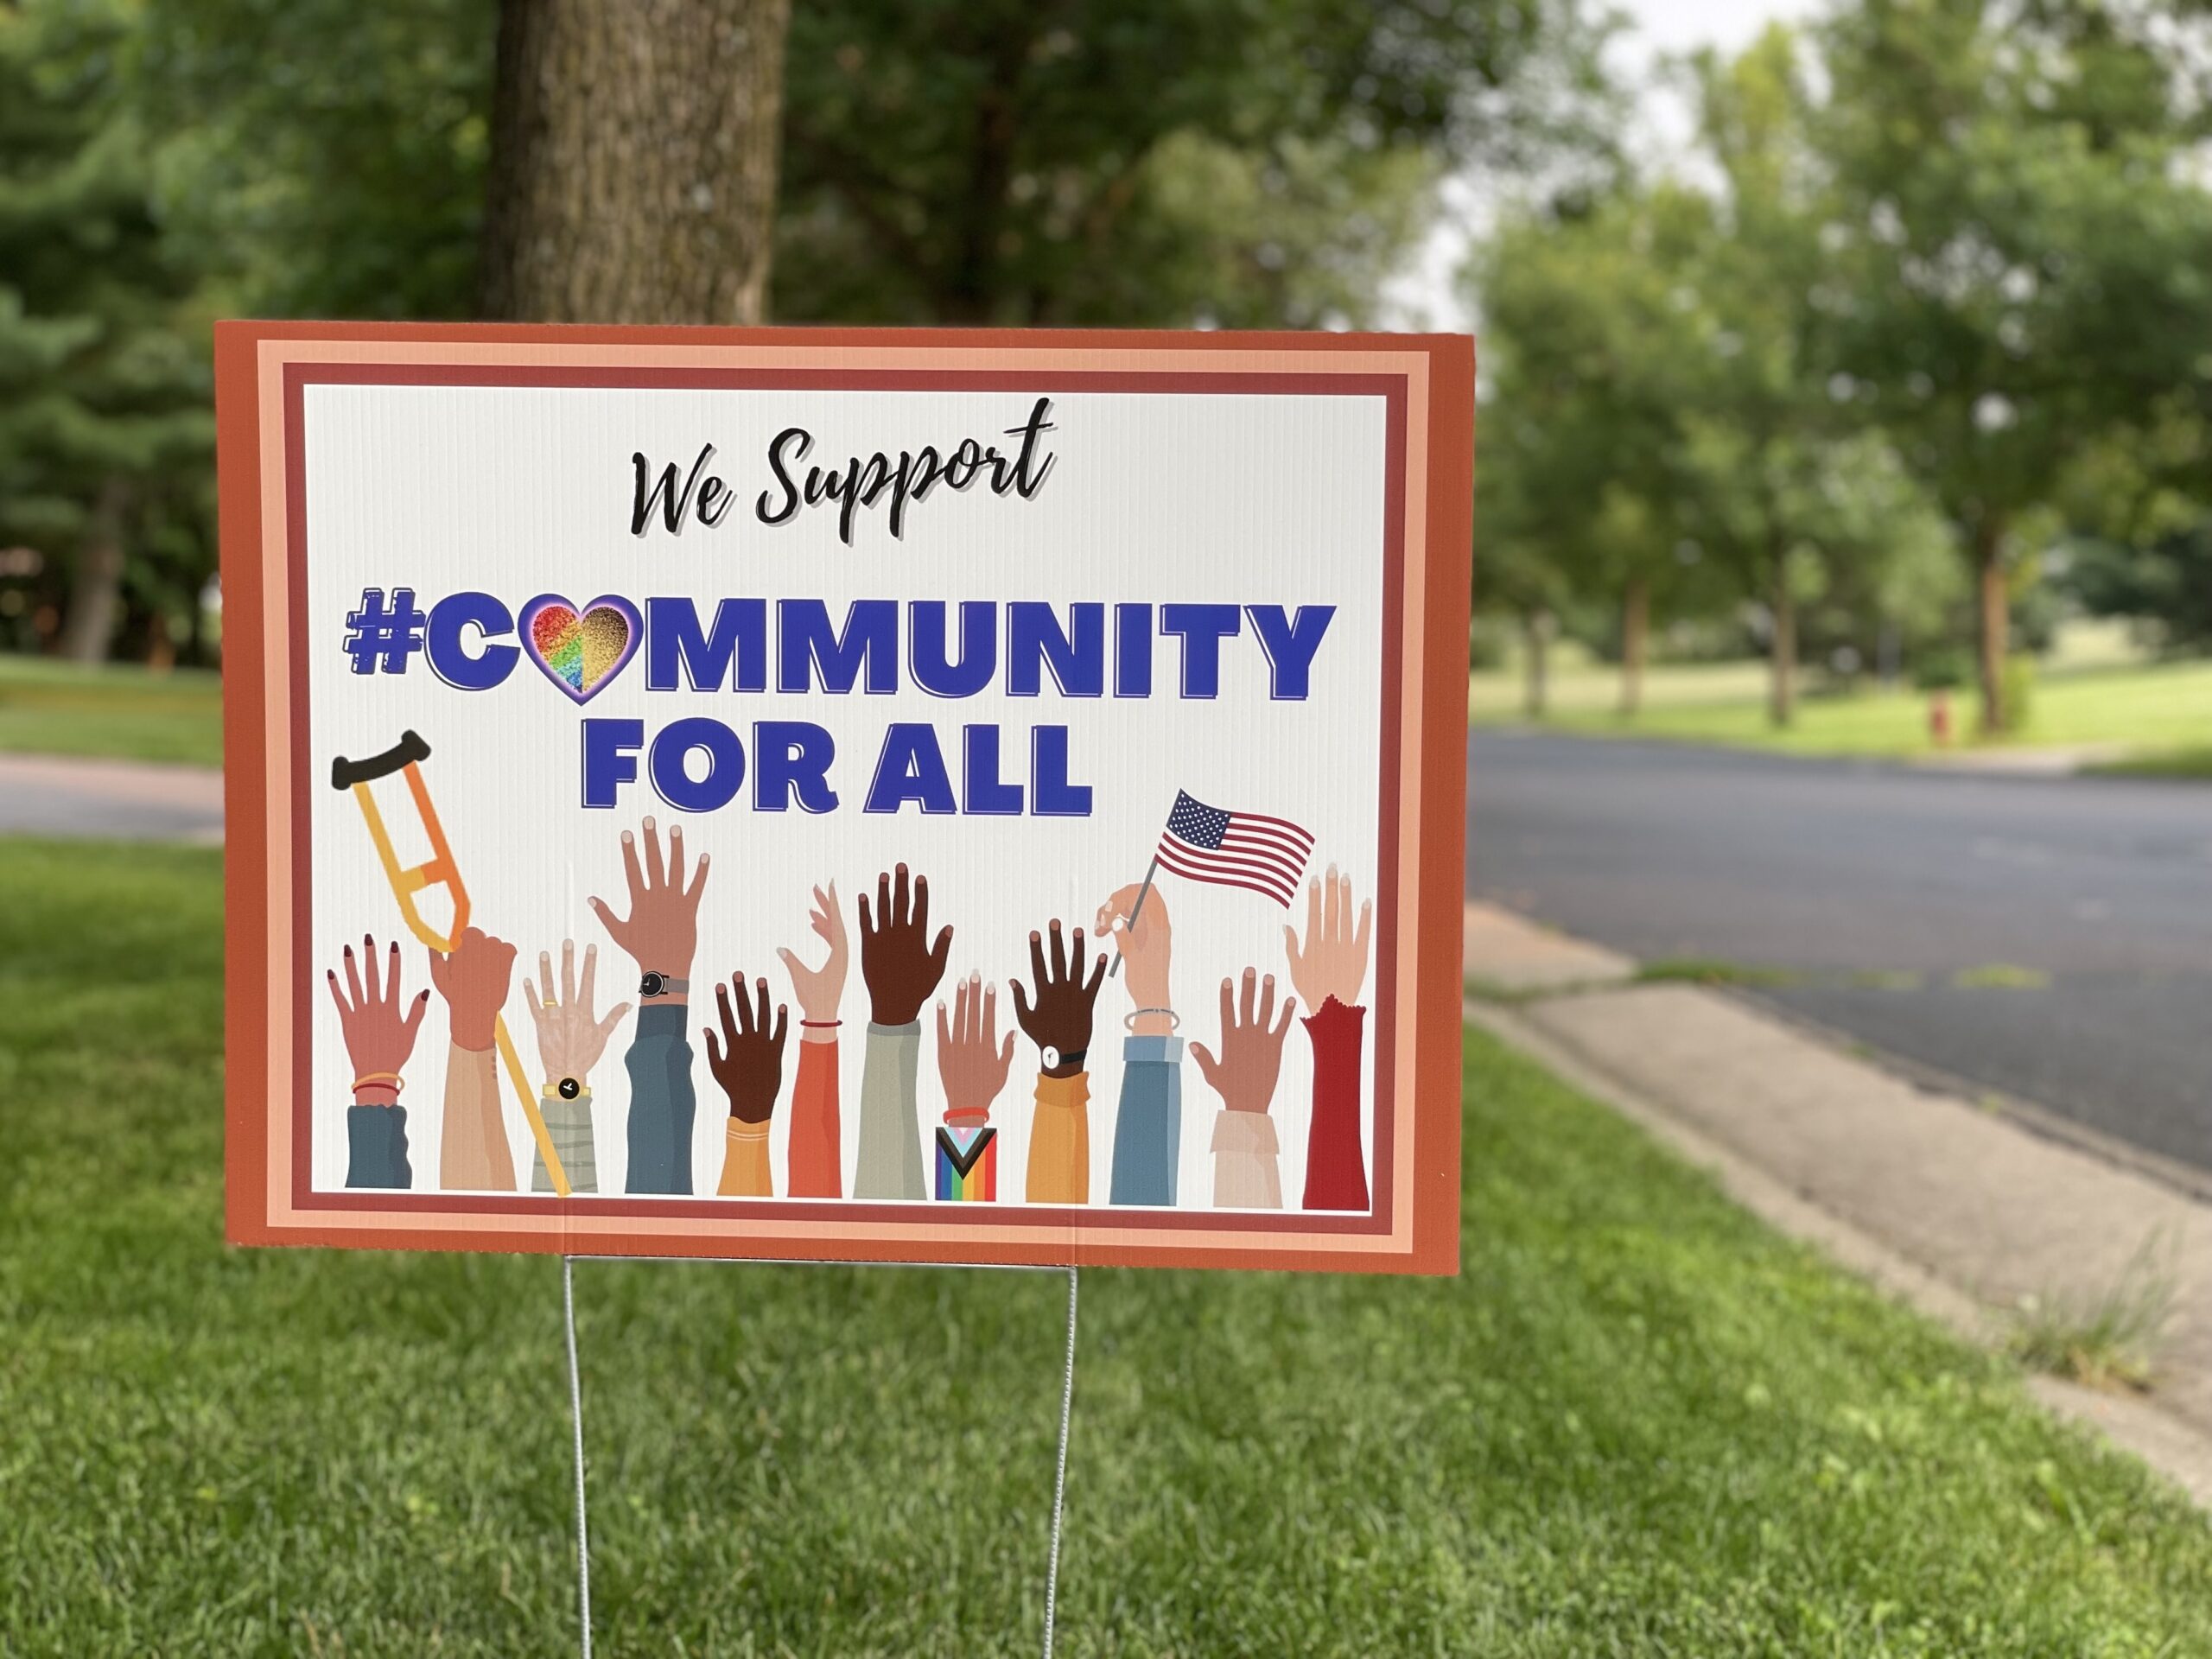 A yard sign displayed in Wausau in 2021 offers support for the "Community for All" resolution supporting diversity.